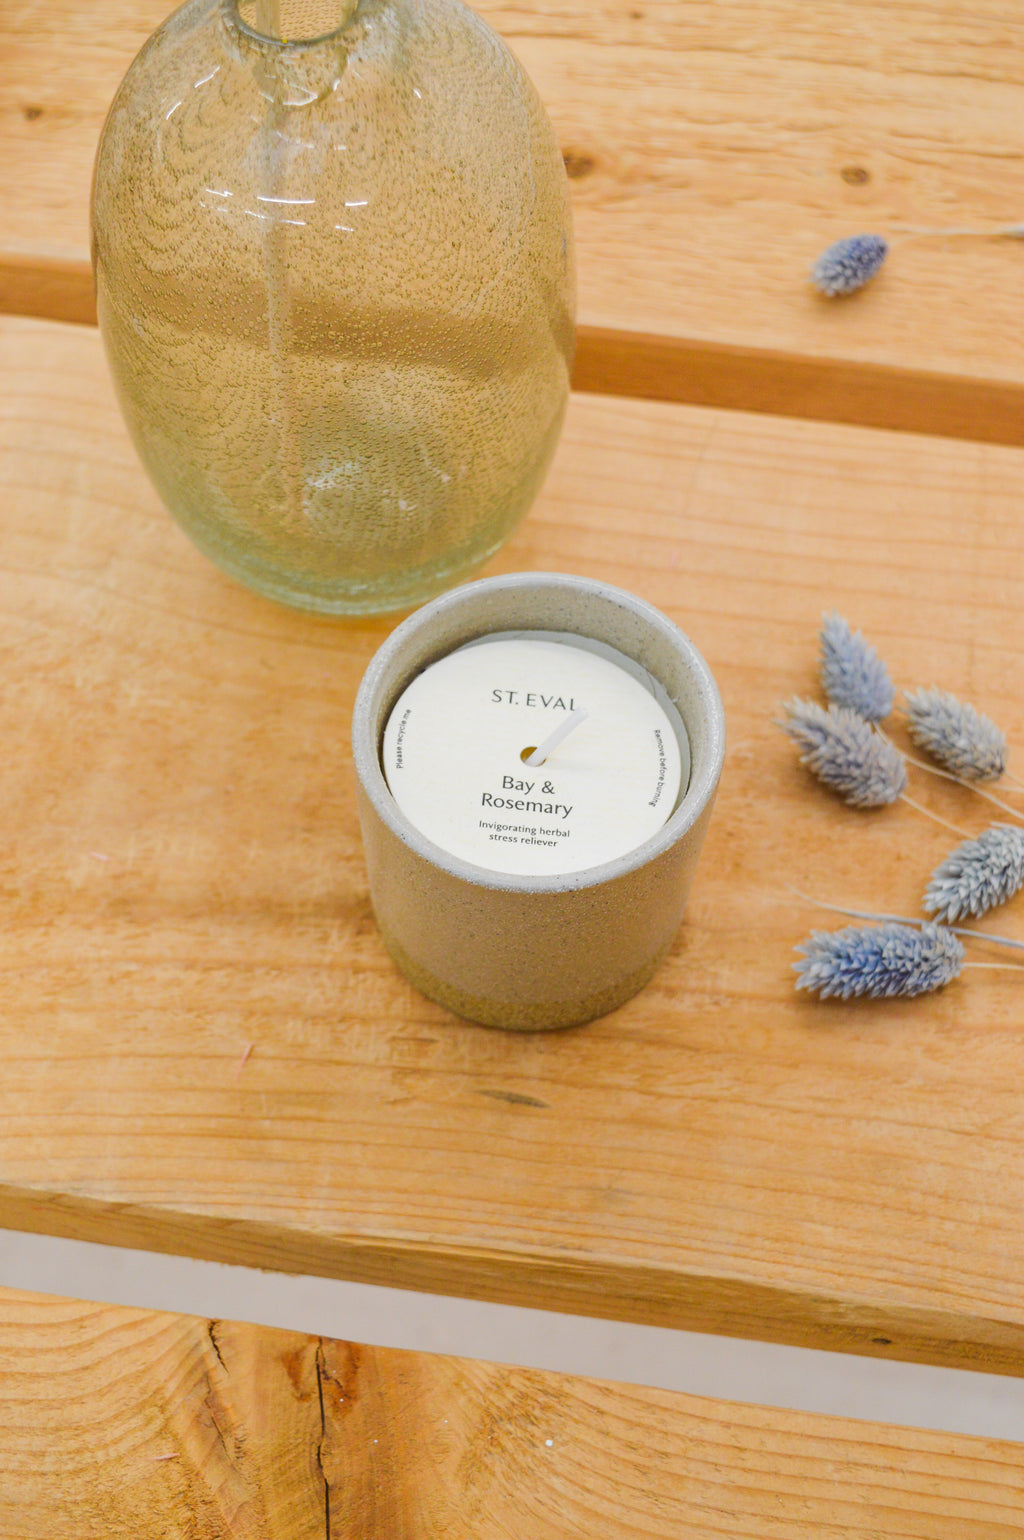 St. Eval Bay & Rosemary Earth & Sky Candle - The Mercantile London